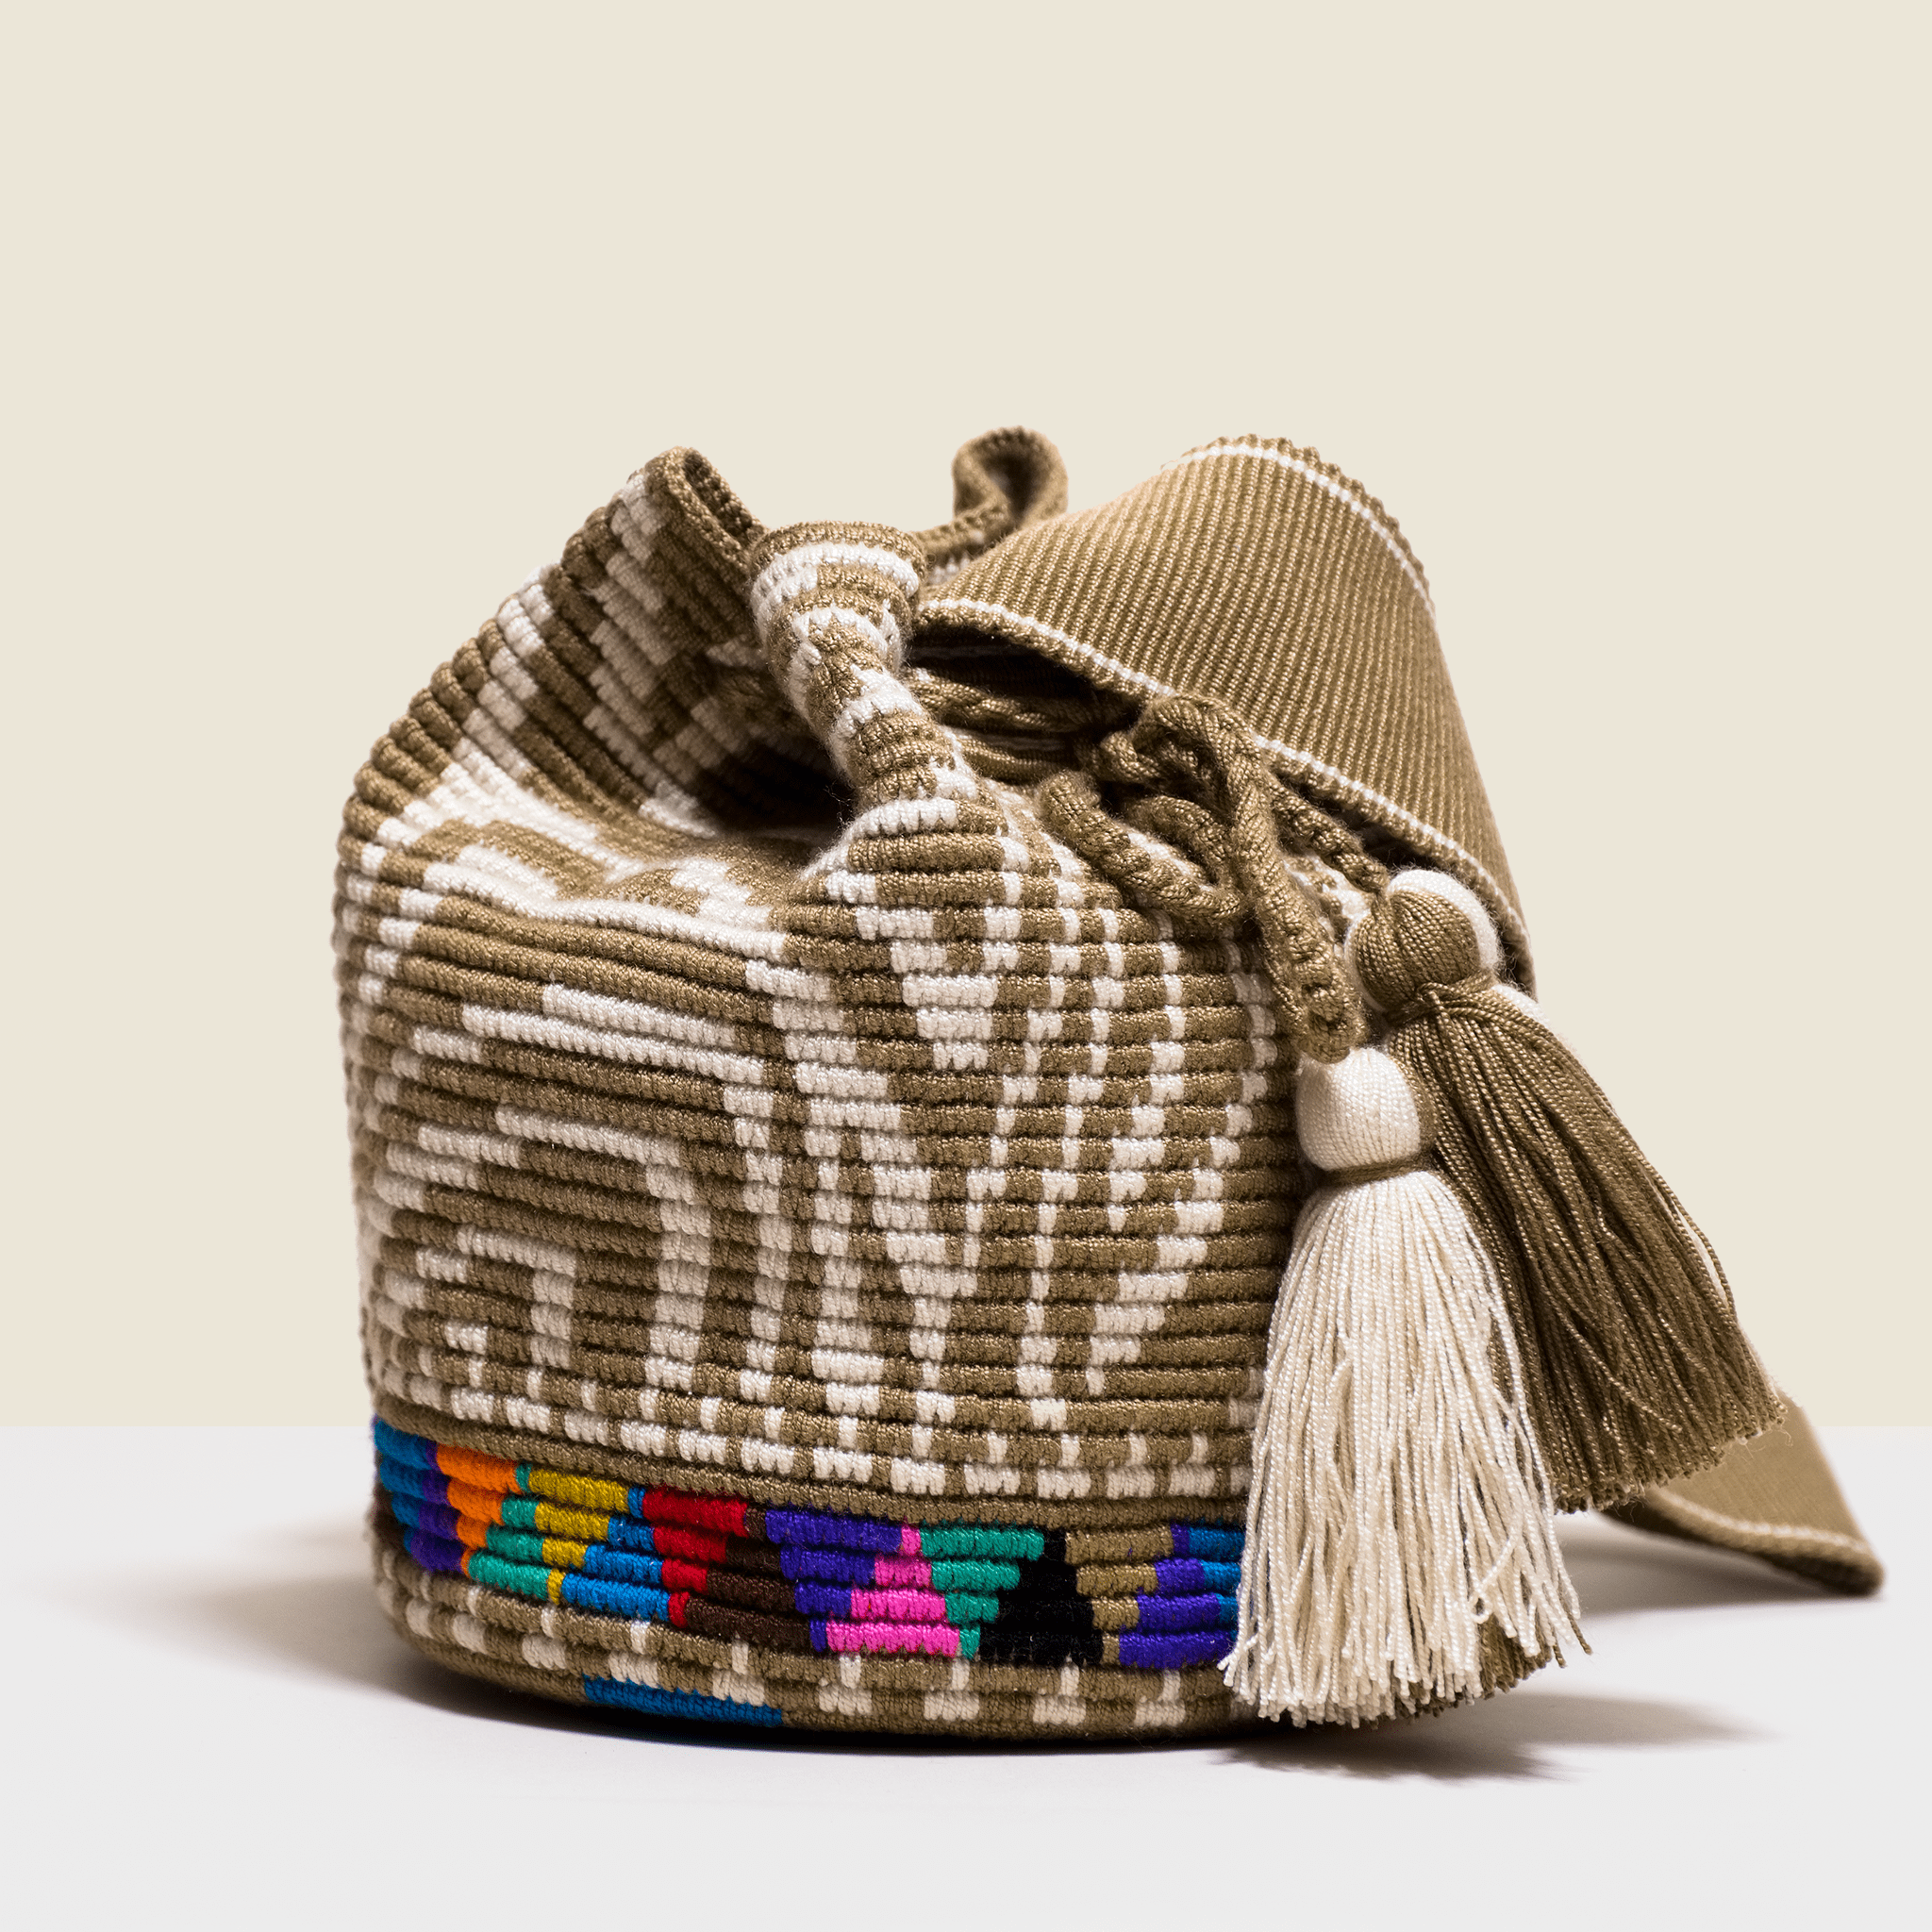 Boho chic bag in cream and camel with zebra design. Tassels to match. Cross - body bag